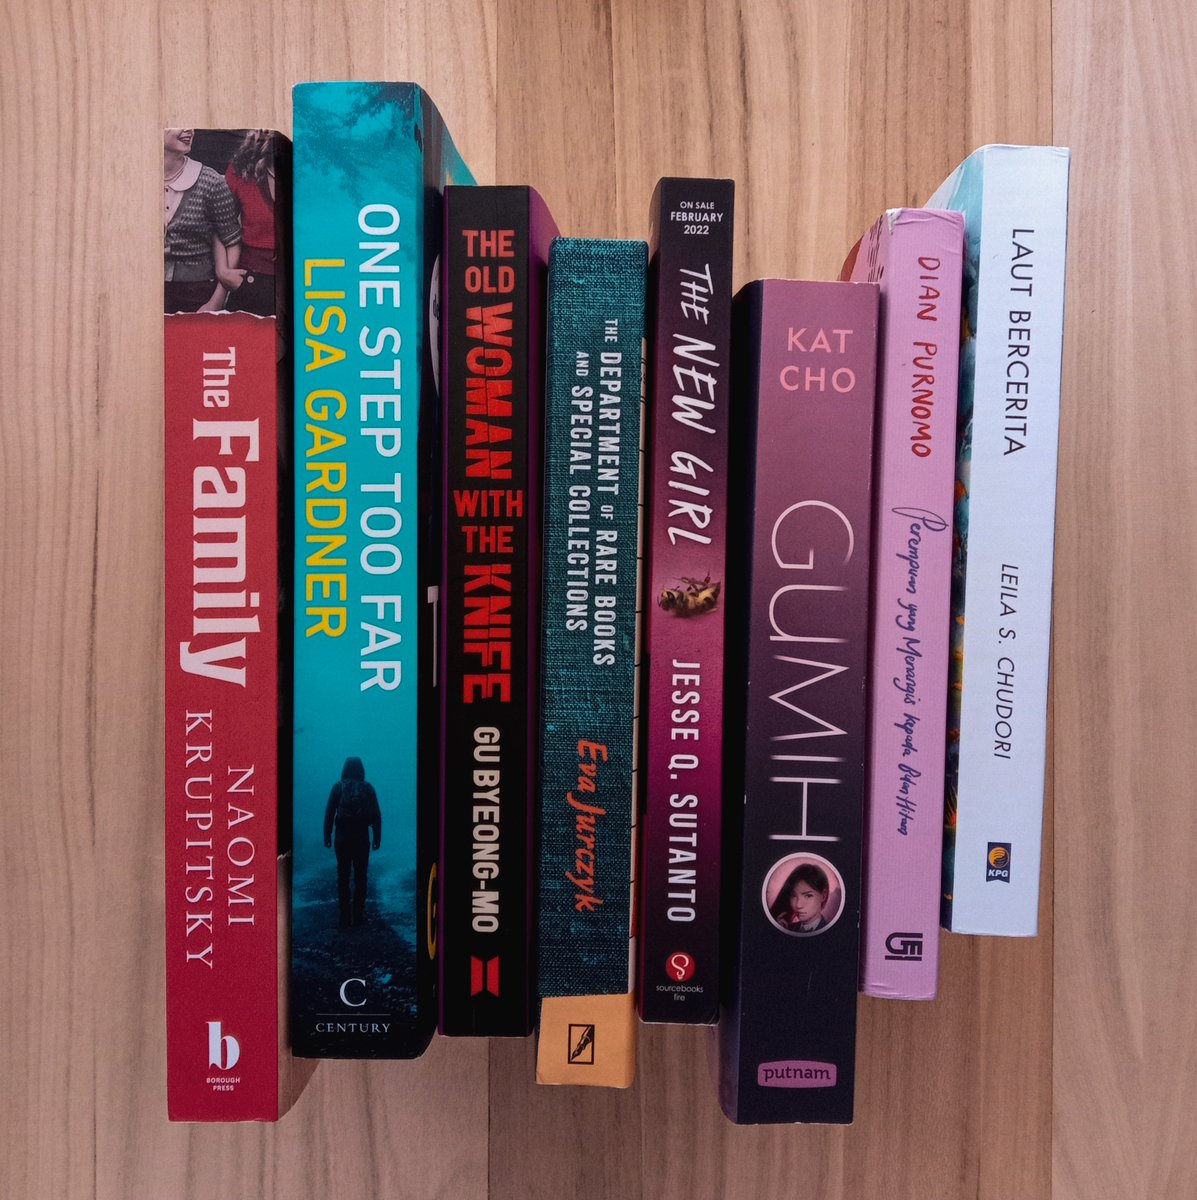 managed to read 8 books in march-- all by female authors for #womanhistorymonth challenge and 2 books i read for #koreanmarch challenge 

my most fav: Laut Bercerita (Leila S. Chudori) and Perempuan Yang Menangis Kepada Bulan Hitam (Dian Purnomo)